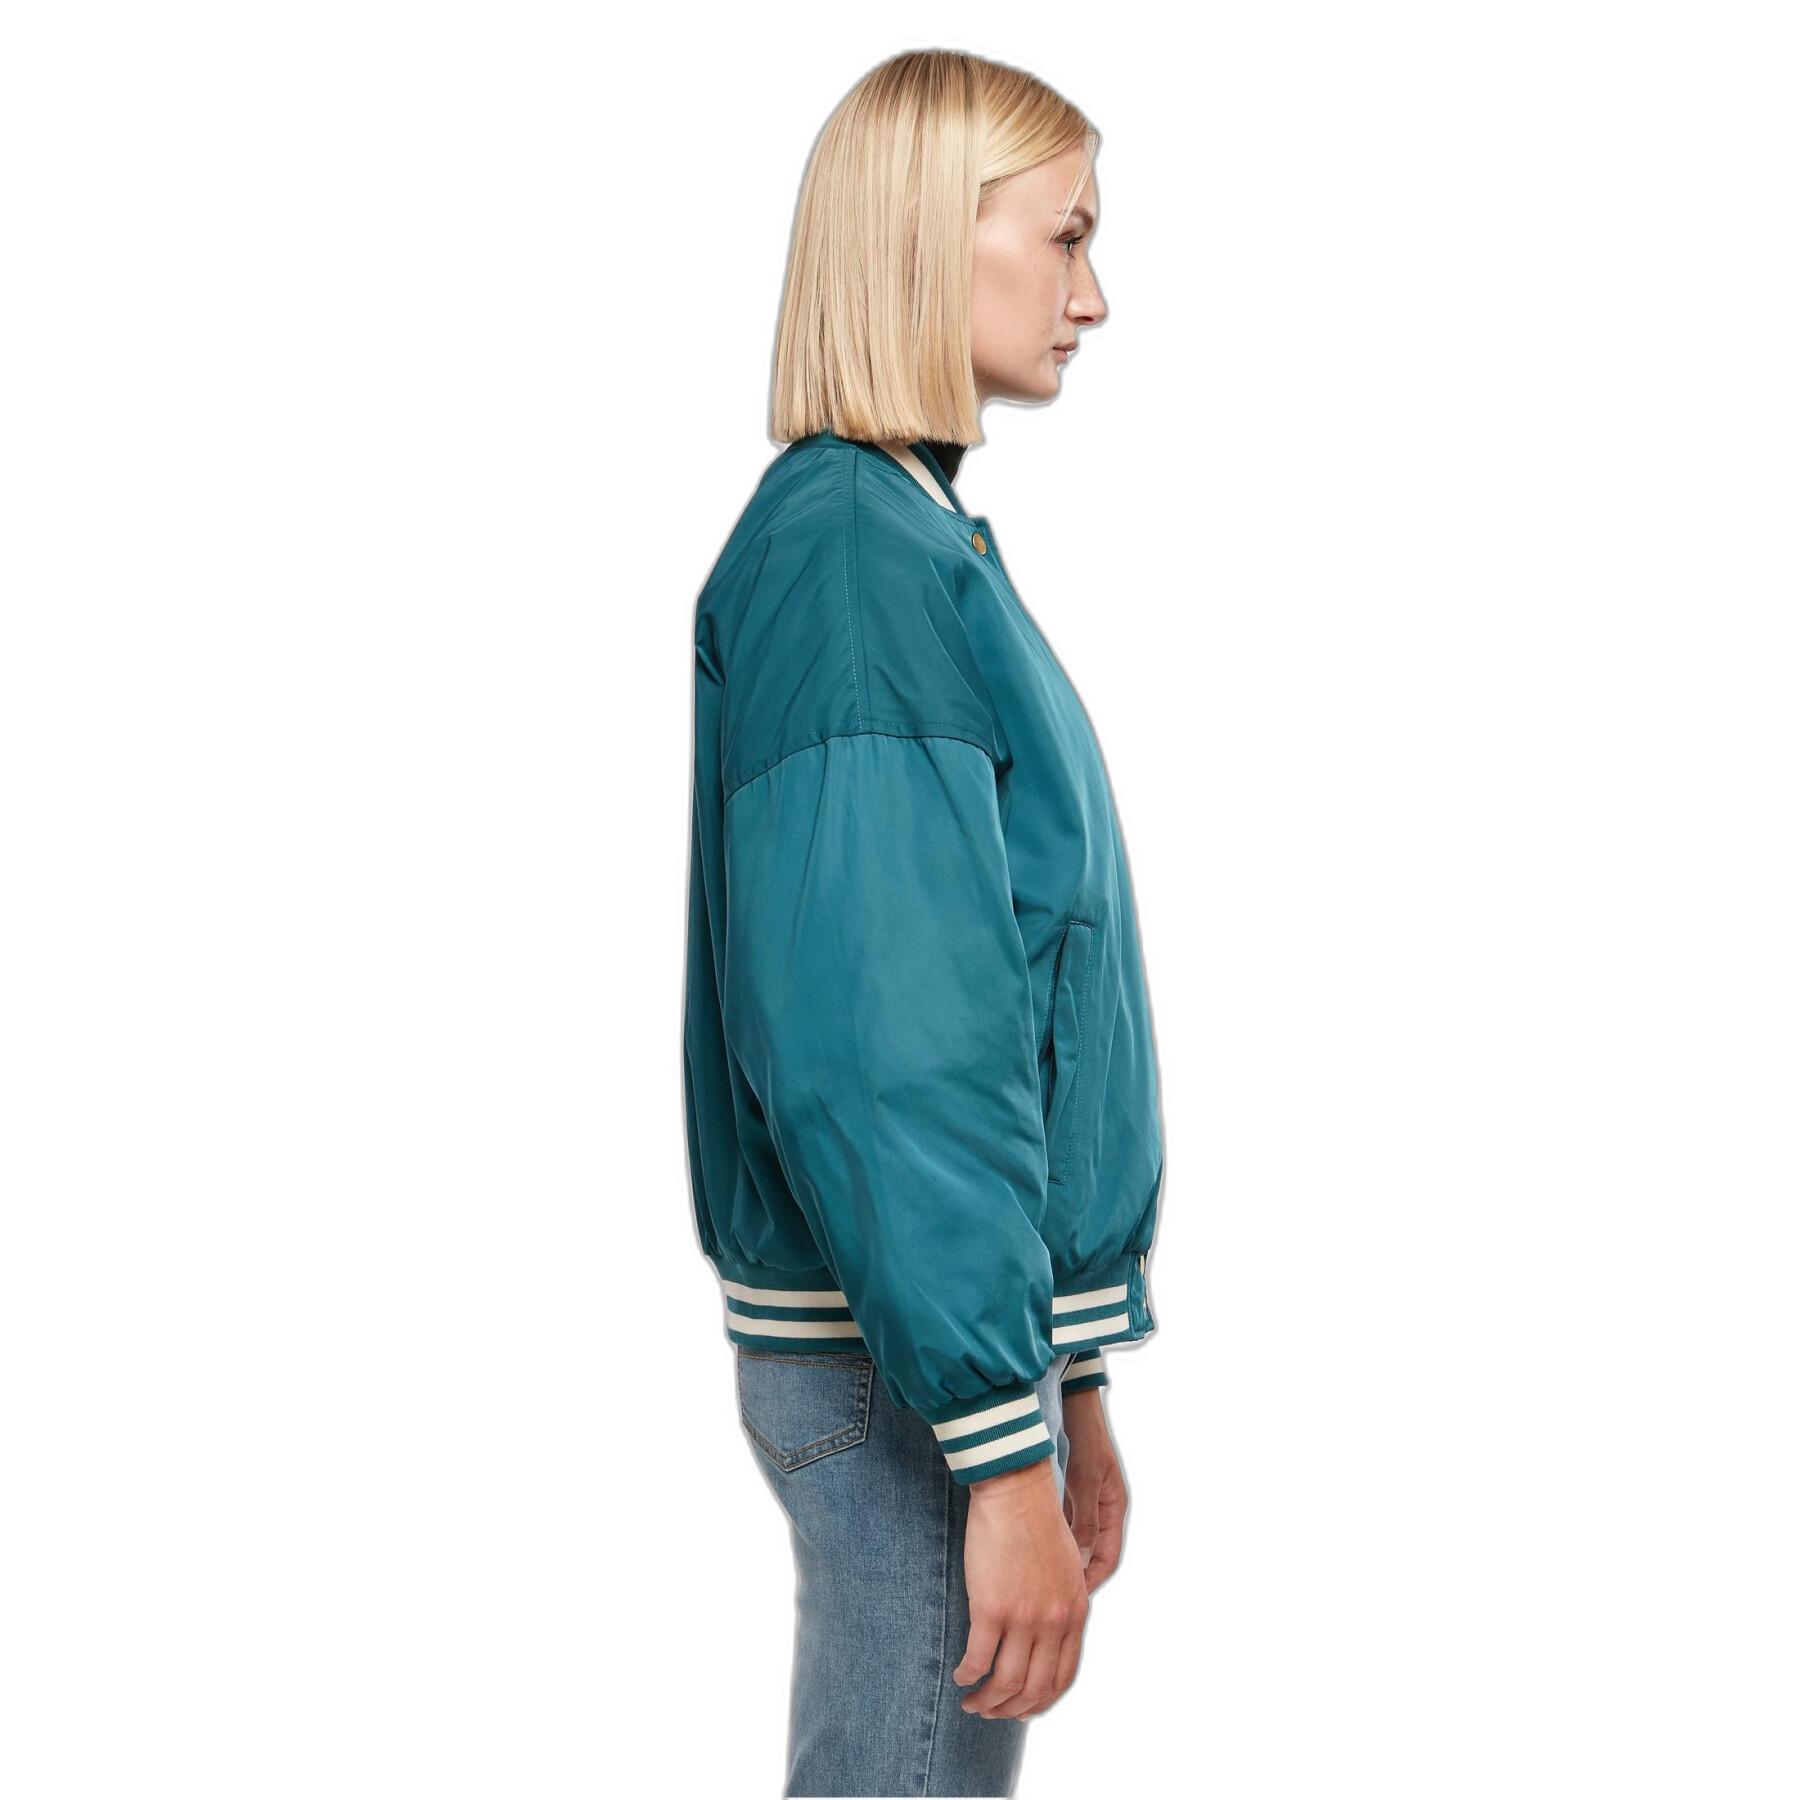 Oversized recycled jacket for women Urban Classics College